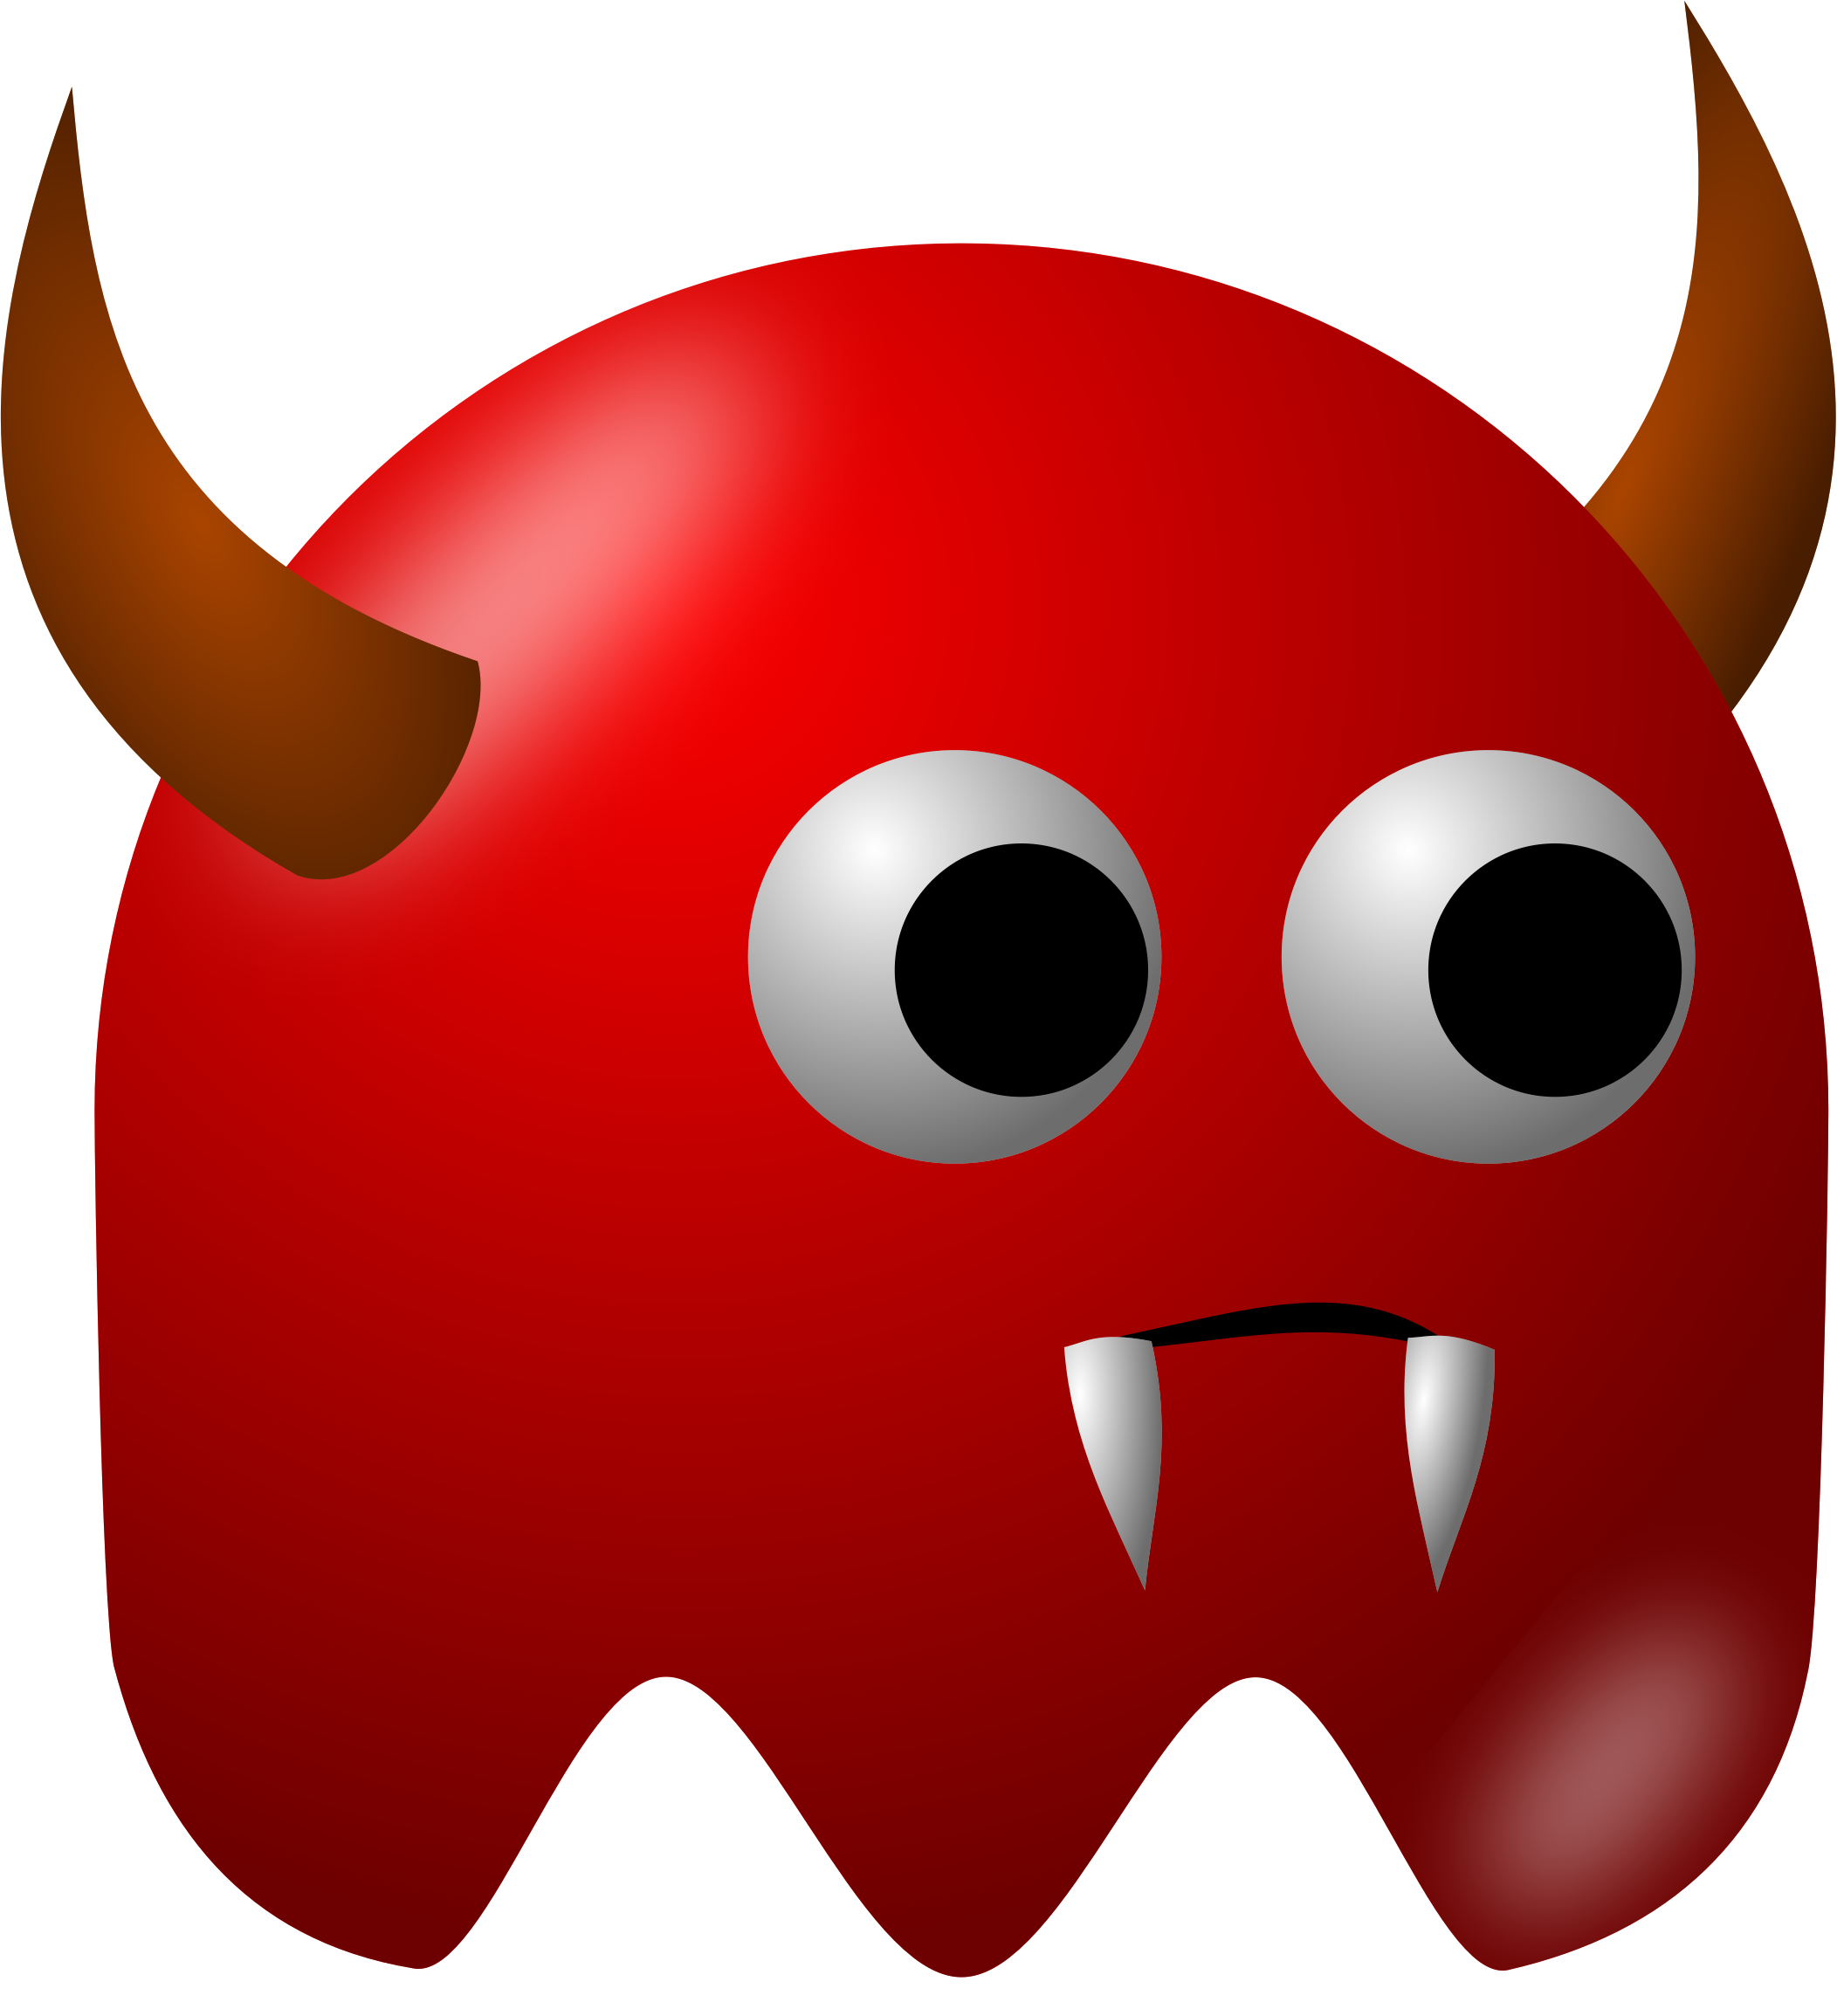 Red ns big image. Monster clipart nose